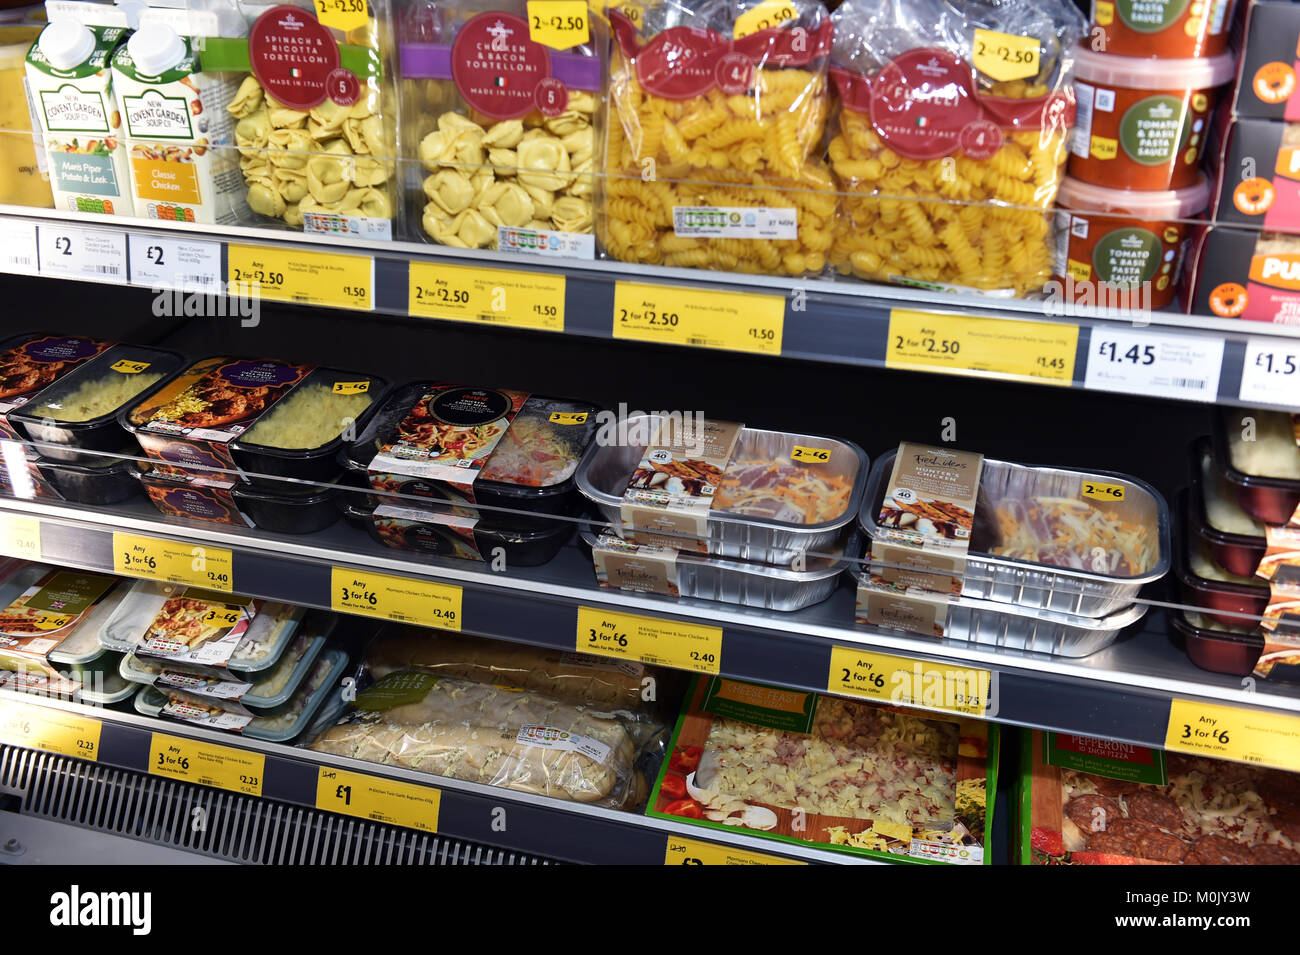 Ready meals on sale in a supermarket petrol station Stock Photo